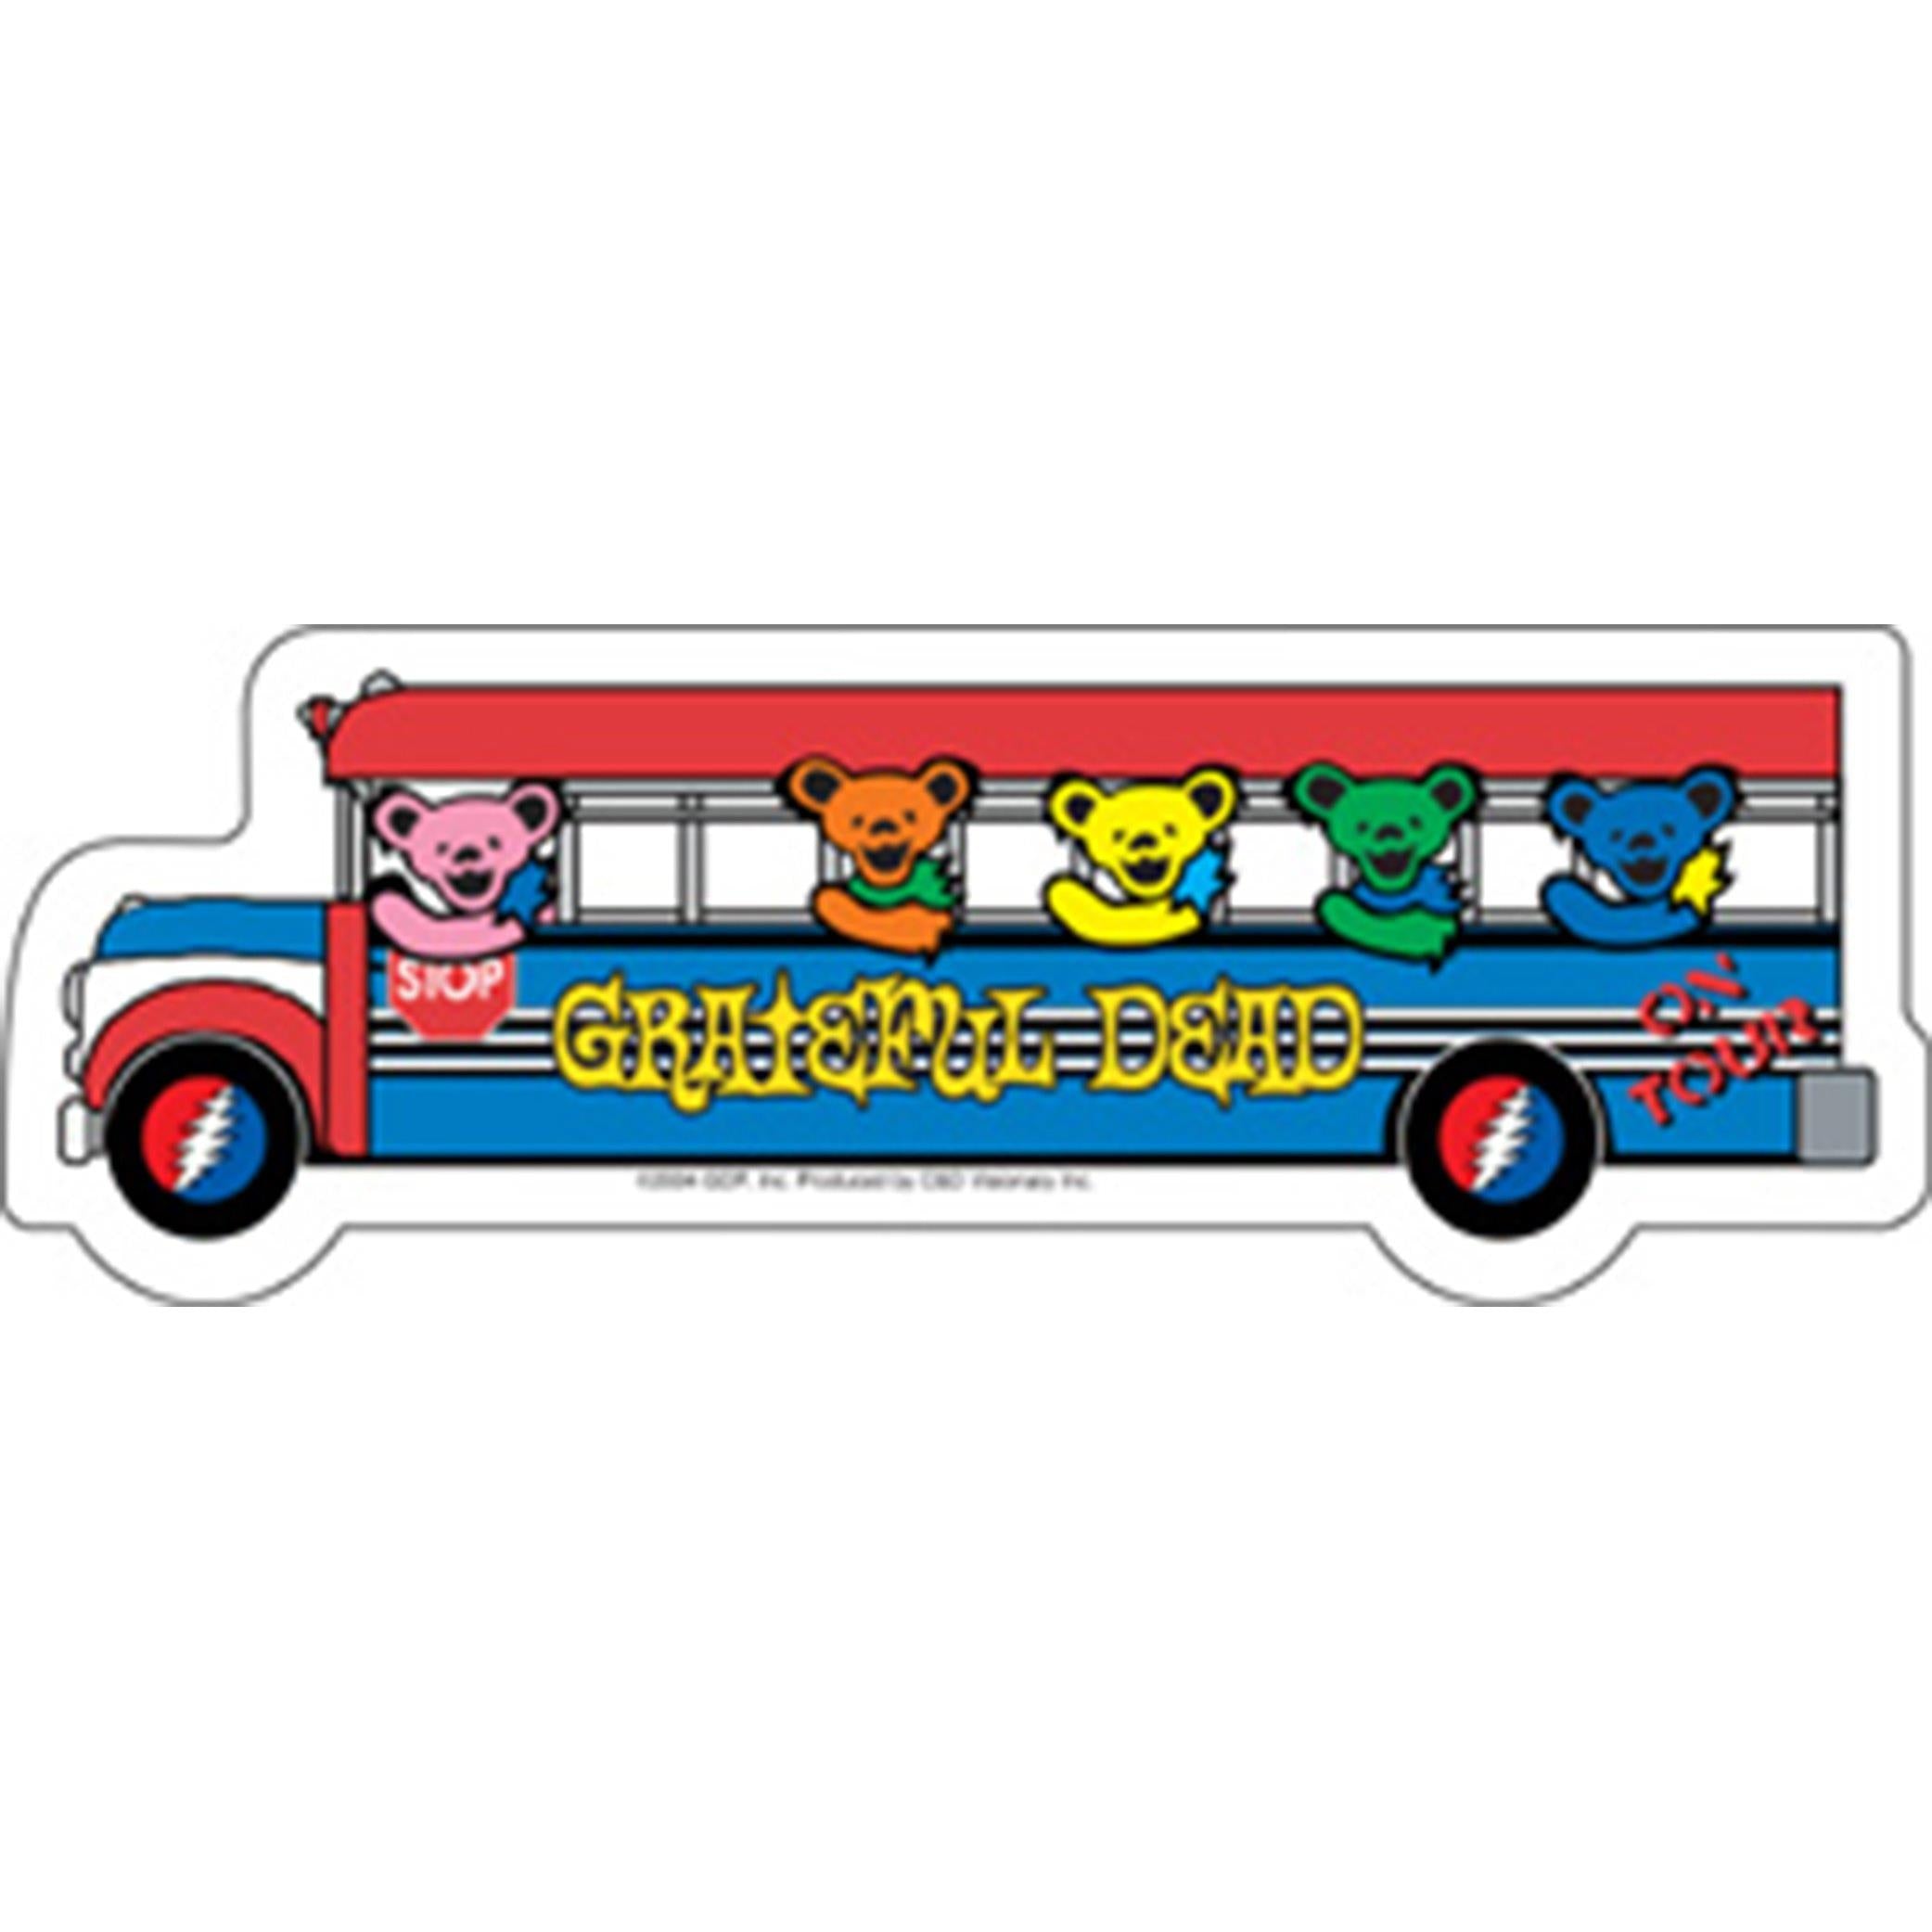 C&D Visionary Licenses Products Grateful Dead Bus Sticker